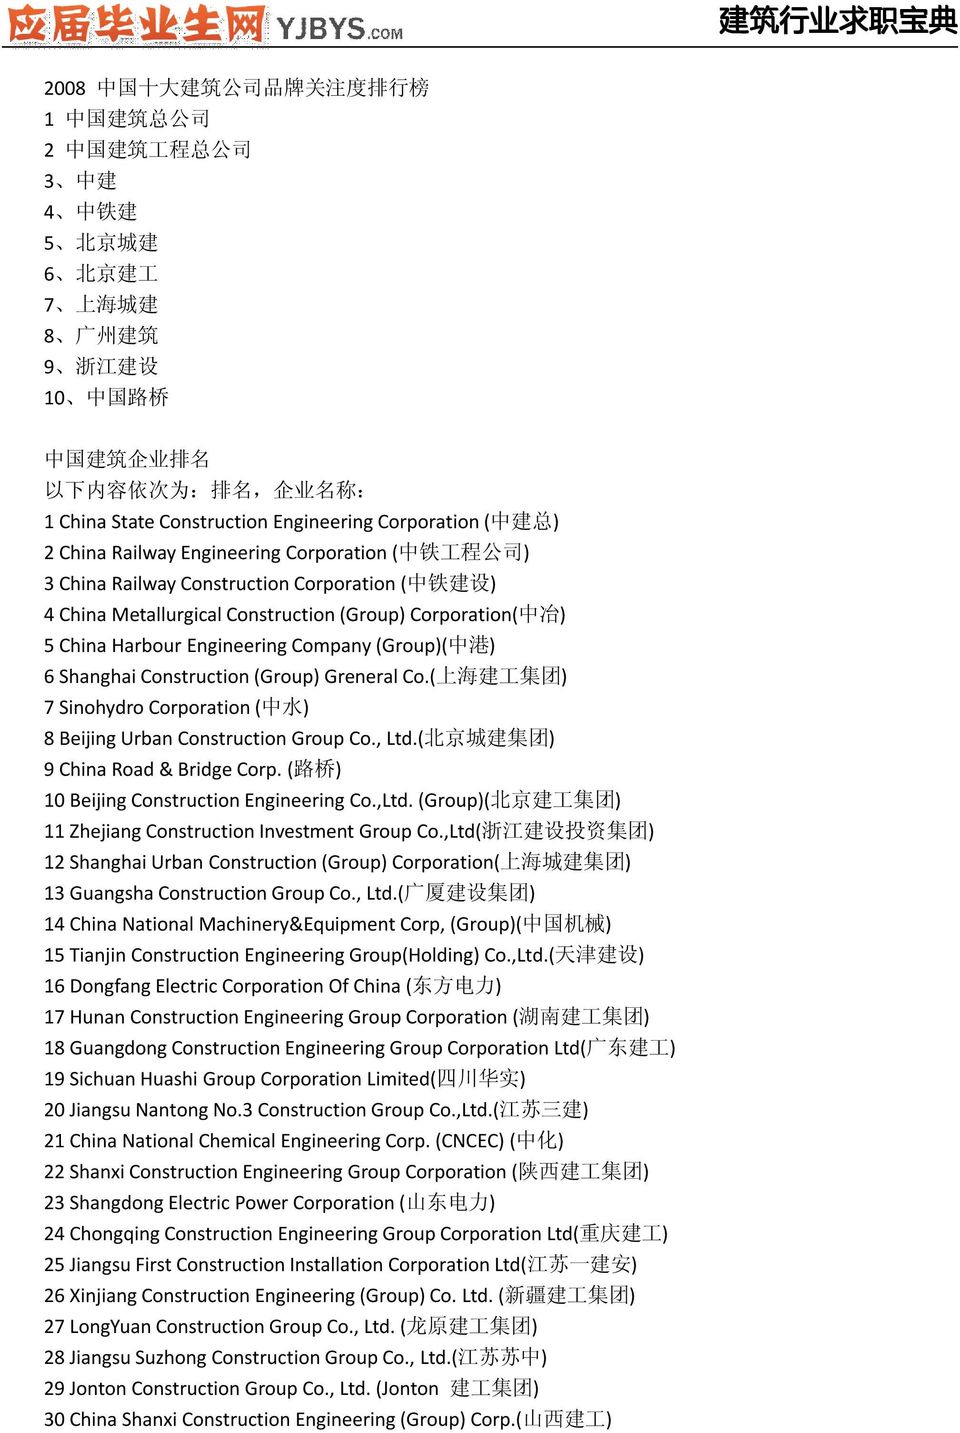 Construction (Group) Corporation( 中 冶 ) 5 China Harbour Engineering Company (Group)( 中 港 ) 6 Shanghai Construction (Group) Greneral Co.